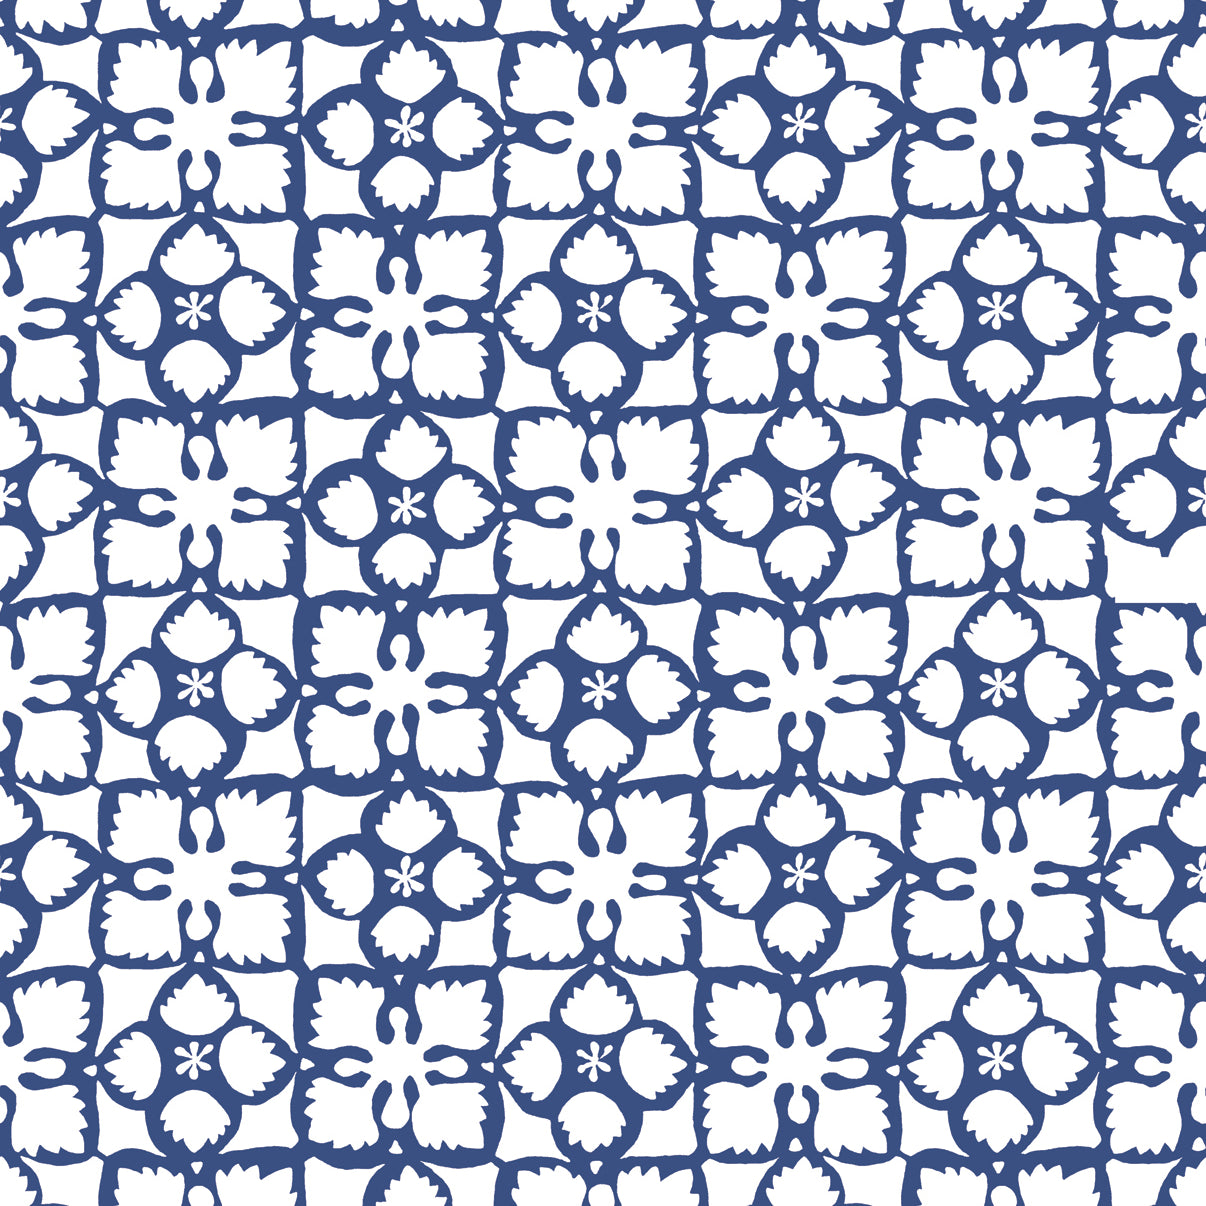 Detail of wallpaper in a botanical lattice print in navy on a white field.